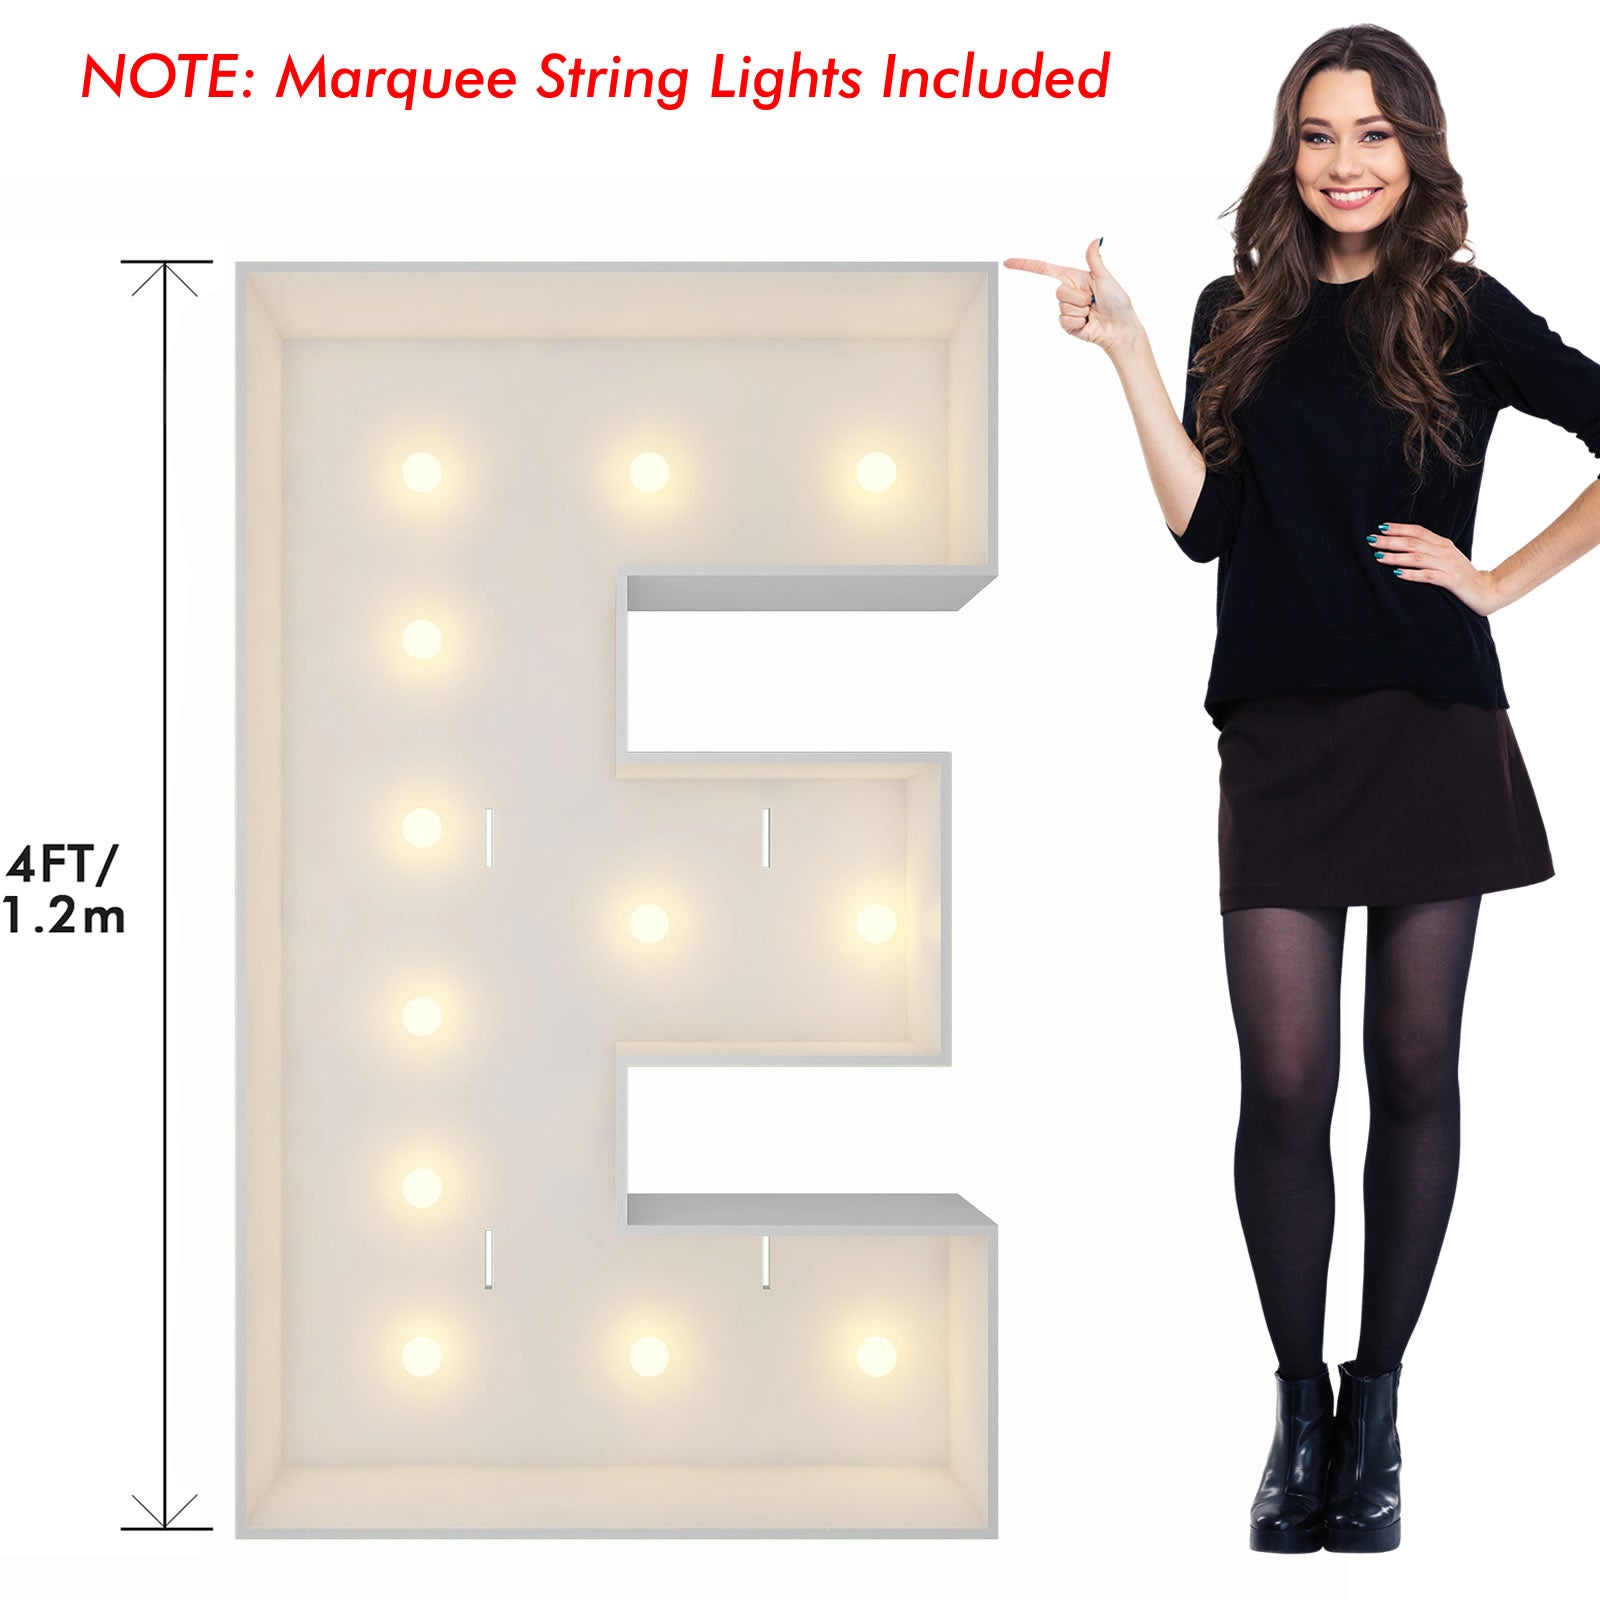 4FT Marquee Light Up Letter E